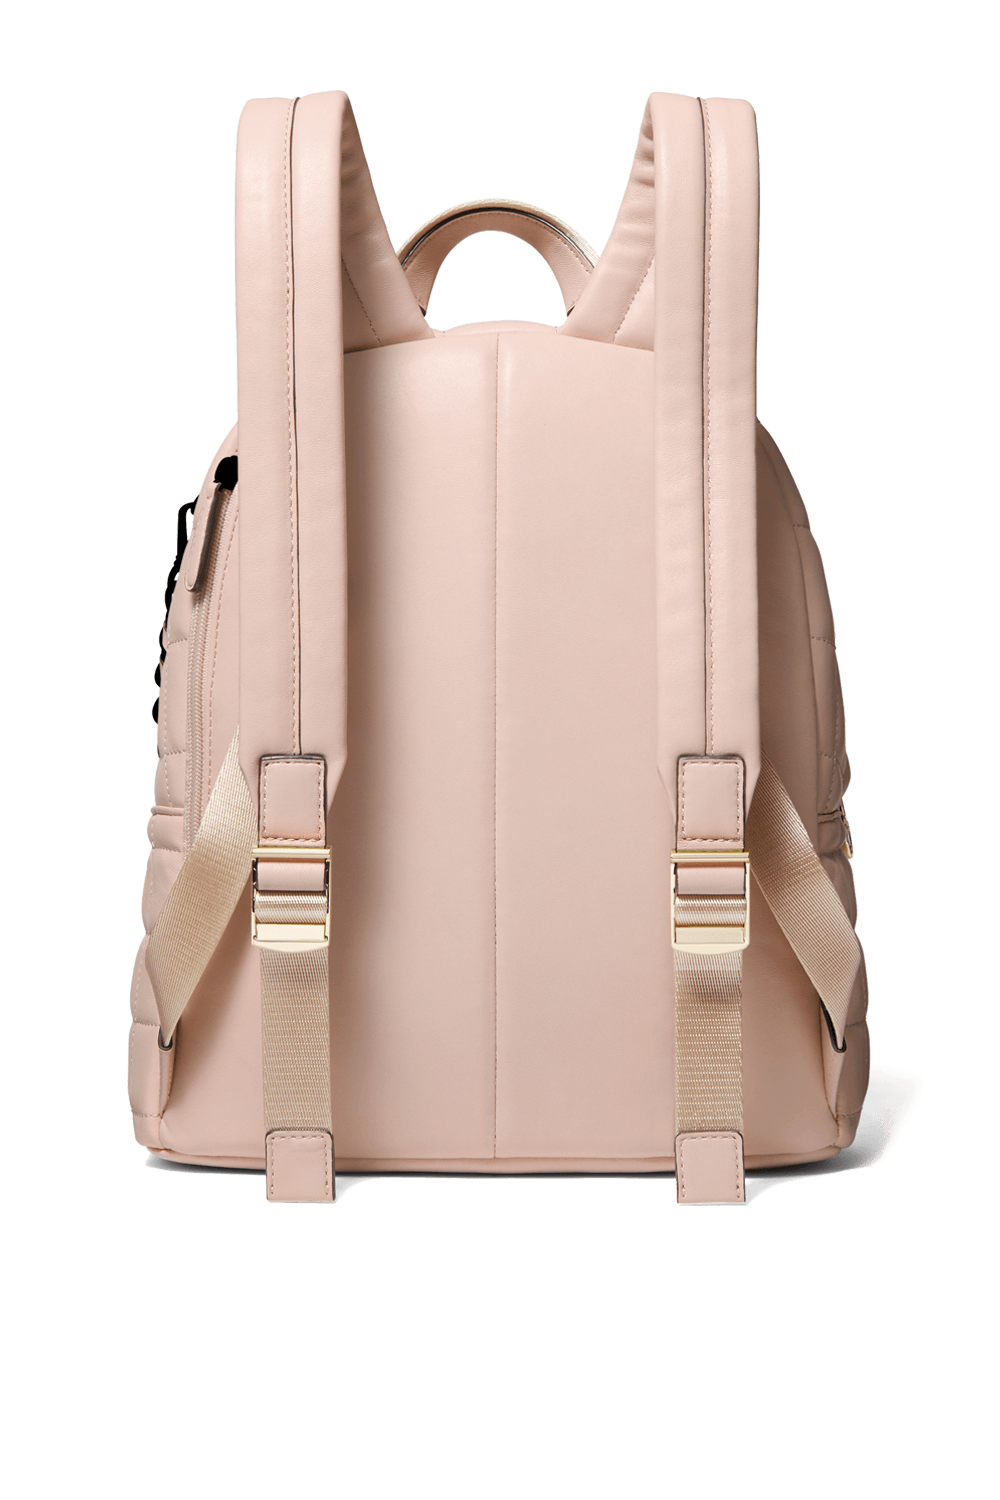 Slater MD Quilted Leather Backpack in Soft Pink MICHAEL KORS